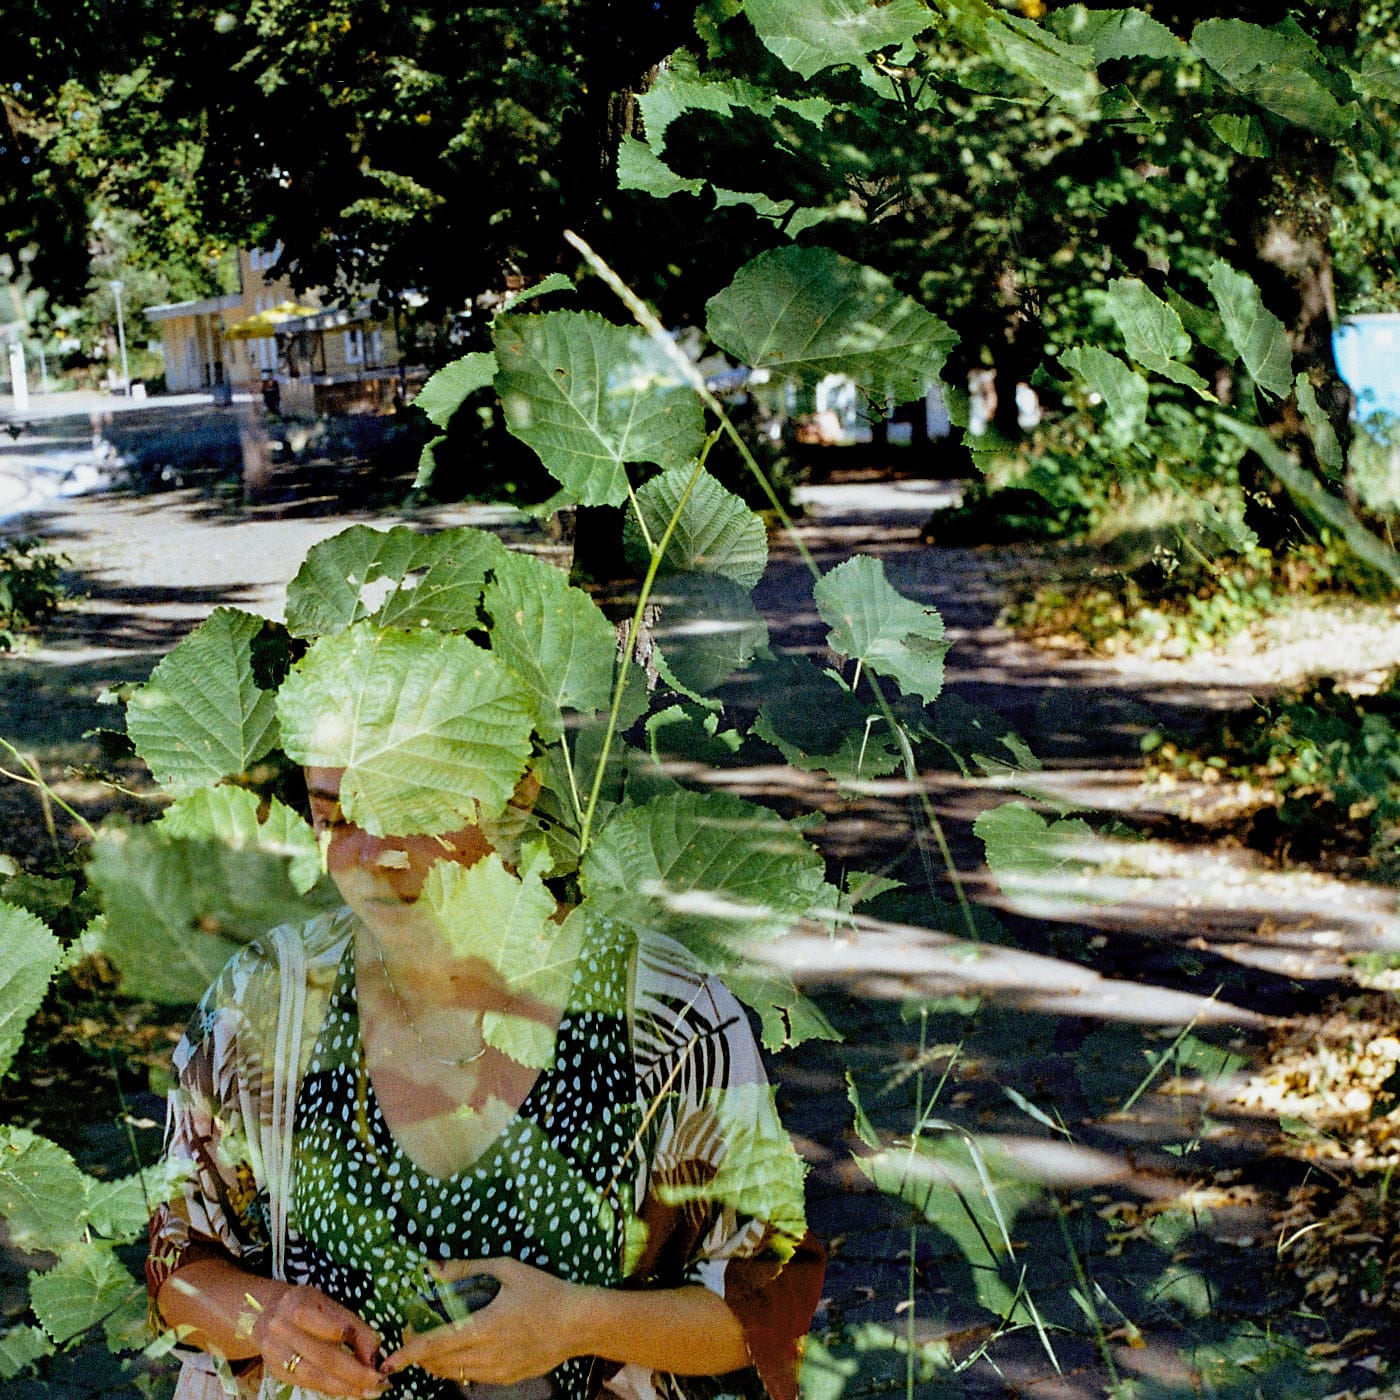 A double exposure of my wife and tree leaves